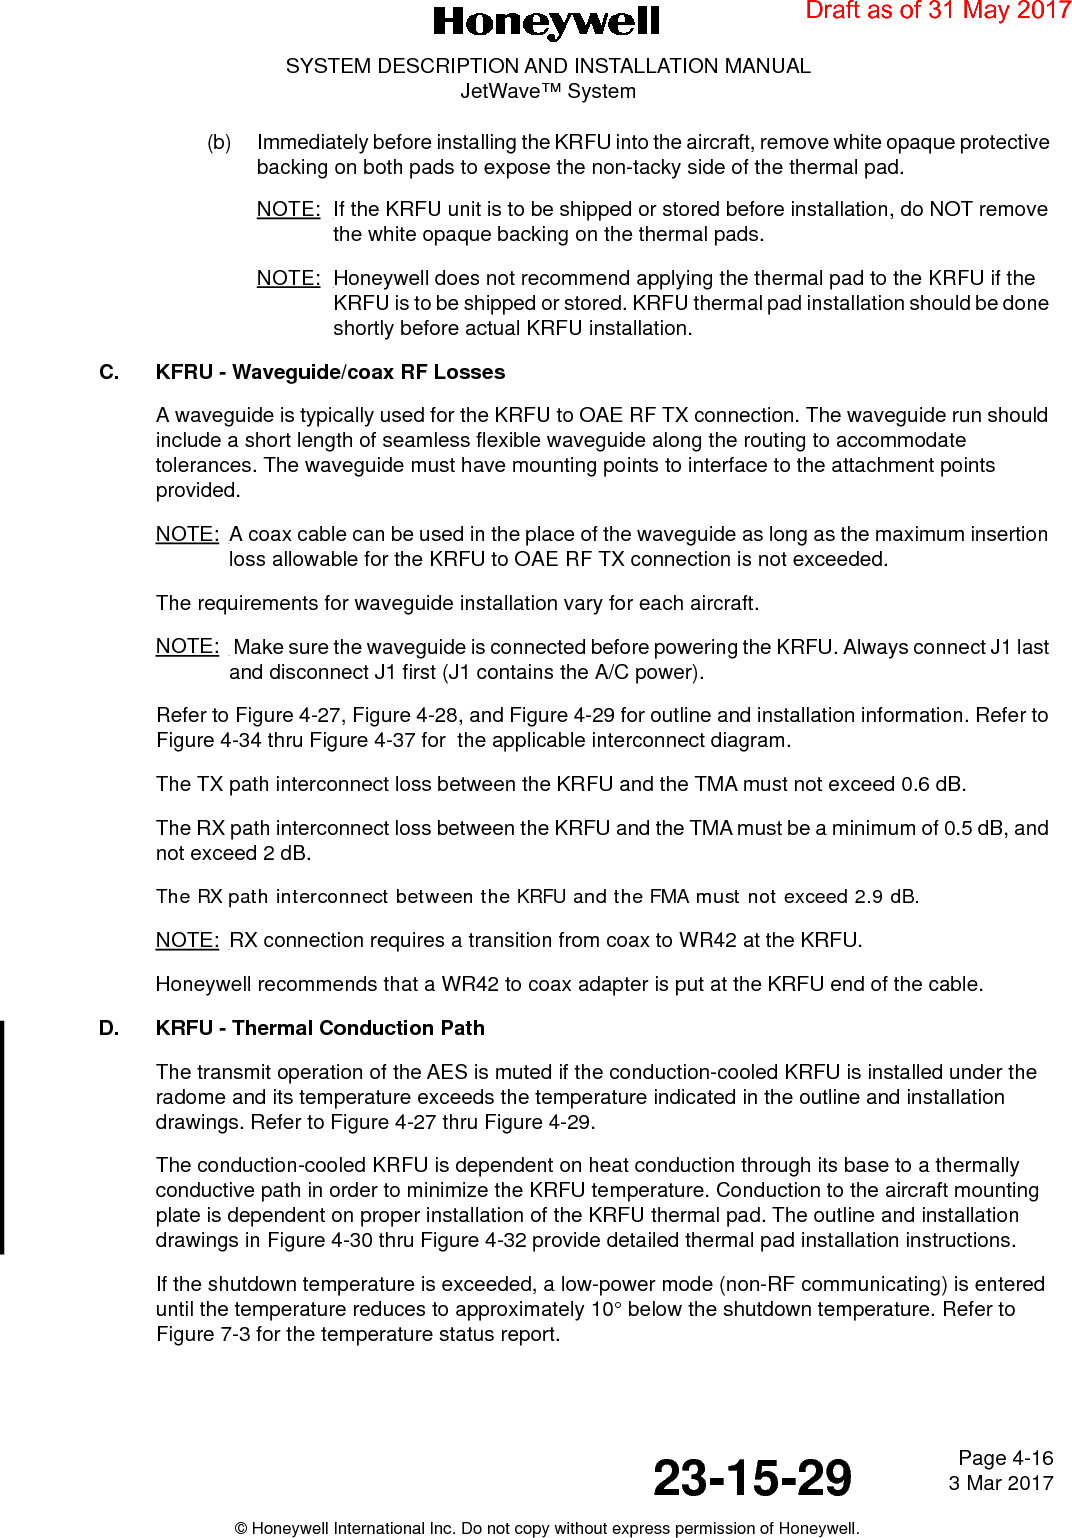 Page 4-16 3 Mar 201723-15-29SYSTEM DESCRIPTION AND INSTALLATION MANUALJetWave™ System© Honeywell International Inc. Do not copy without express permission of Honeywell.(b) Immediately before installing the KRFU into the aircraft, remove white opaque protective backing on both pads to expose the non-tacky side of the thermal pad. NOTE: If the KRFU unit is to be shipped or stored before installation, do NOT remove the white opaque backing on the thermal pads. NOTE: Honeywell does not recommend applying the thermal pad to the KRFU if the KRFU is to be shipped or stored. KRFU thermal pad installation should be done shortly before actual KRFU installation.C. KFRU - Waveguide/coax RF LossesA waveguide is typically used for the KRFU to OAE RF TX connection. The waveguide run should include a short length of seamless flexible waveguide along the routing to accommodate tolerances. The waveguide must have mounting points to interface to the attachment points provided.NOTE: A coax cable can be used in the place of the waveguide as long as the maximum insertion loss allowable for the KRFU to OAE RF TX connection is not exceeded.The requirements for waveguide installation vary for each aircraft.NOTE:  Make sure the waveguide is connected before powering the KRFU. Always connect J1 last and disconnect J1 first (J1 contains the A/C power).Refer to Figure 4-27, Figure 4-28, and Figure 4-29 for outline and installation information. Refer to Figure 4-34 thru Figure 4-37 for  the applicable interconnect diagram.The TX path interconnect loss between the KRFU and the TMA must not exceed 0.6 dB.The RX path interconnect loss between the KRFU and the TMA must be a minimum of 0.5 dB, and not exceed 2 dB. The RX path interconnect between the KRFU and the FMA must not exceed 2.9 dB.NOTE: RX connection requires a transition from coax to WR42 at the KRFU.Honeywell recommends that a WR42 to coax adapter is put at the KRFU end of the cable.D. KRFU - Thermal Conduction PathThe transmit operation of the AES is muted if the conduction-cooled KRFU is installed under the radome and its temperature exceeds the temperature indicated in the outline and installation drawings. Refer to Figure 4-27 thru Figure 4-29.The conduction-cooled KRFU is dependent on heat conduction through its base to a thermally conductive path in order to minimize the KRFU temperature. Conduction to the aircraft mounting plate is dependent on proper installation of the KRFU thermal pad. The outline and installation drawings in Figure 4-30 thru Figure 4-32 provide detailed thermal pad installation instructions.If the shutdown temperature is exceeded, a low-power mode (non-RF communicating) is entered until the temperature reduces to approximately 10° below the shutdown temperature. Refer to Figure 7-3 for the temperature status report.Draft as of 31 May 2017